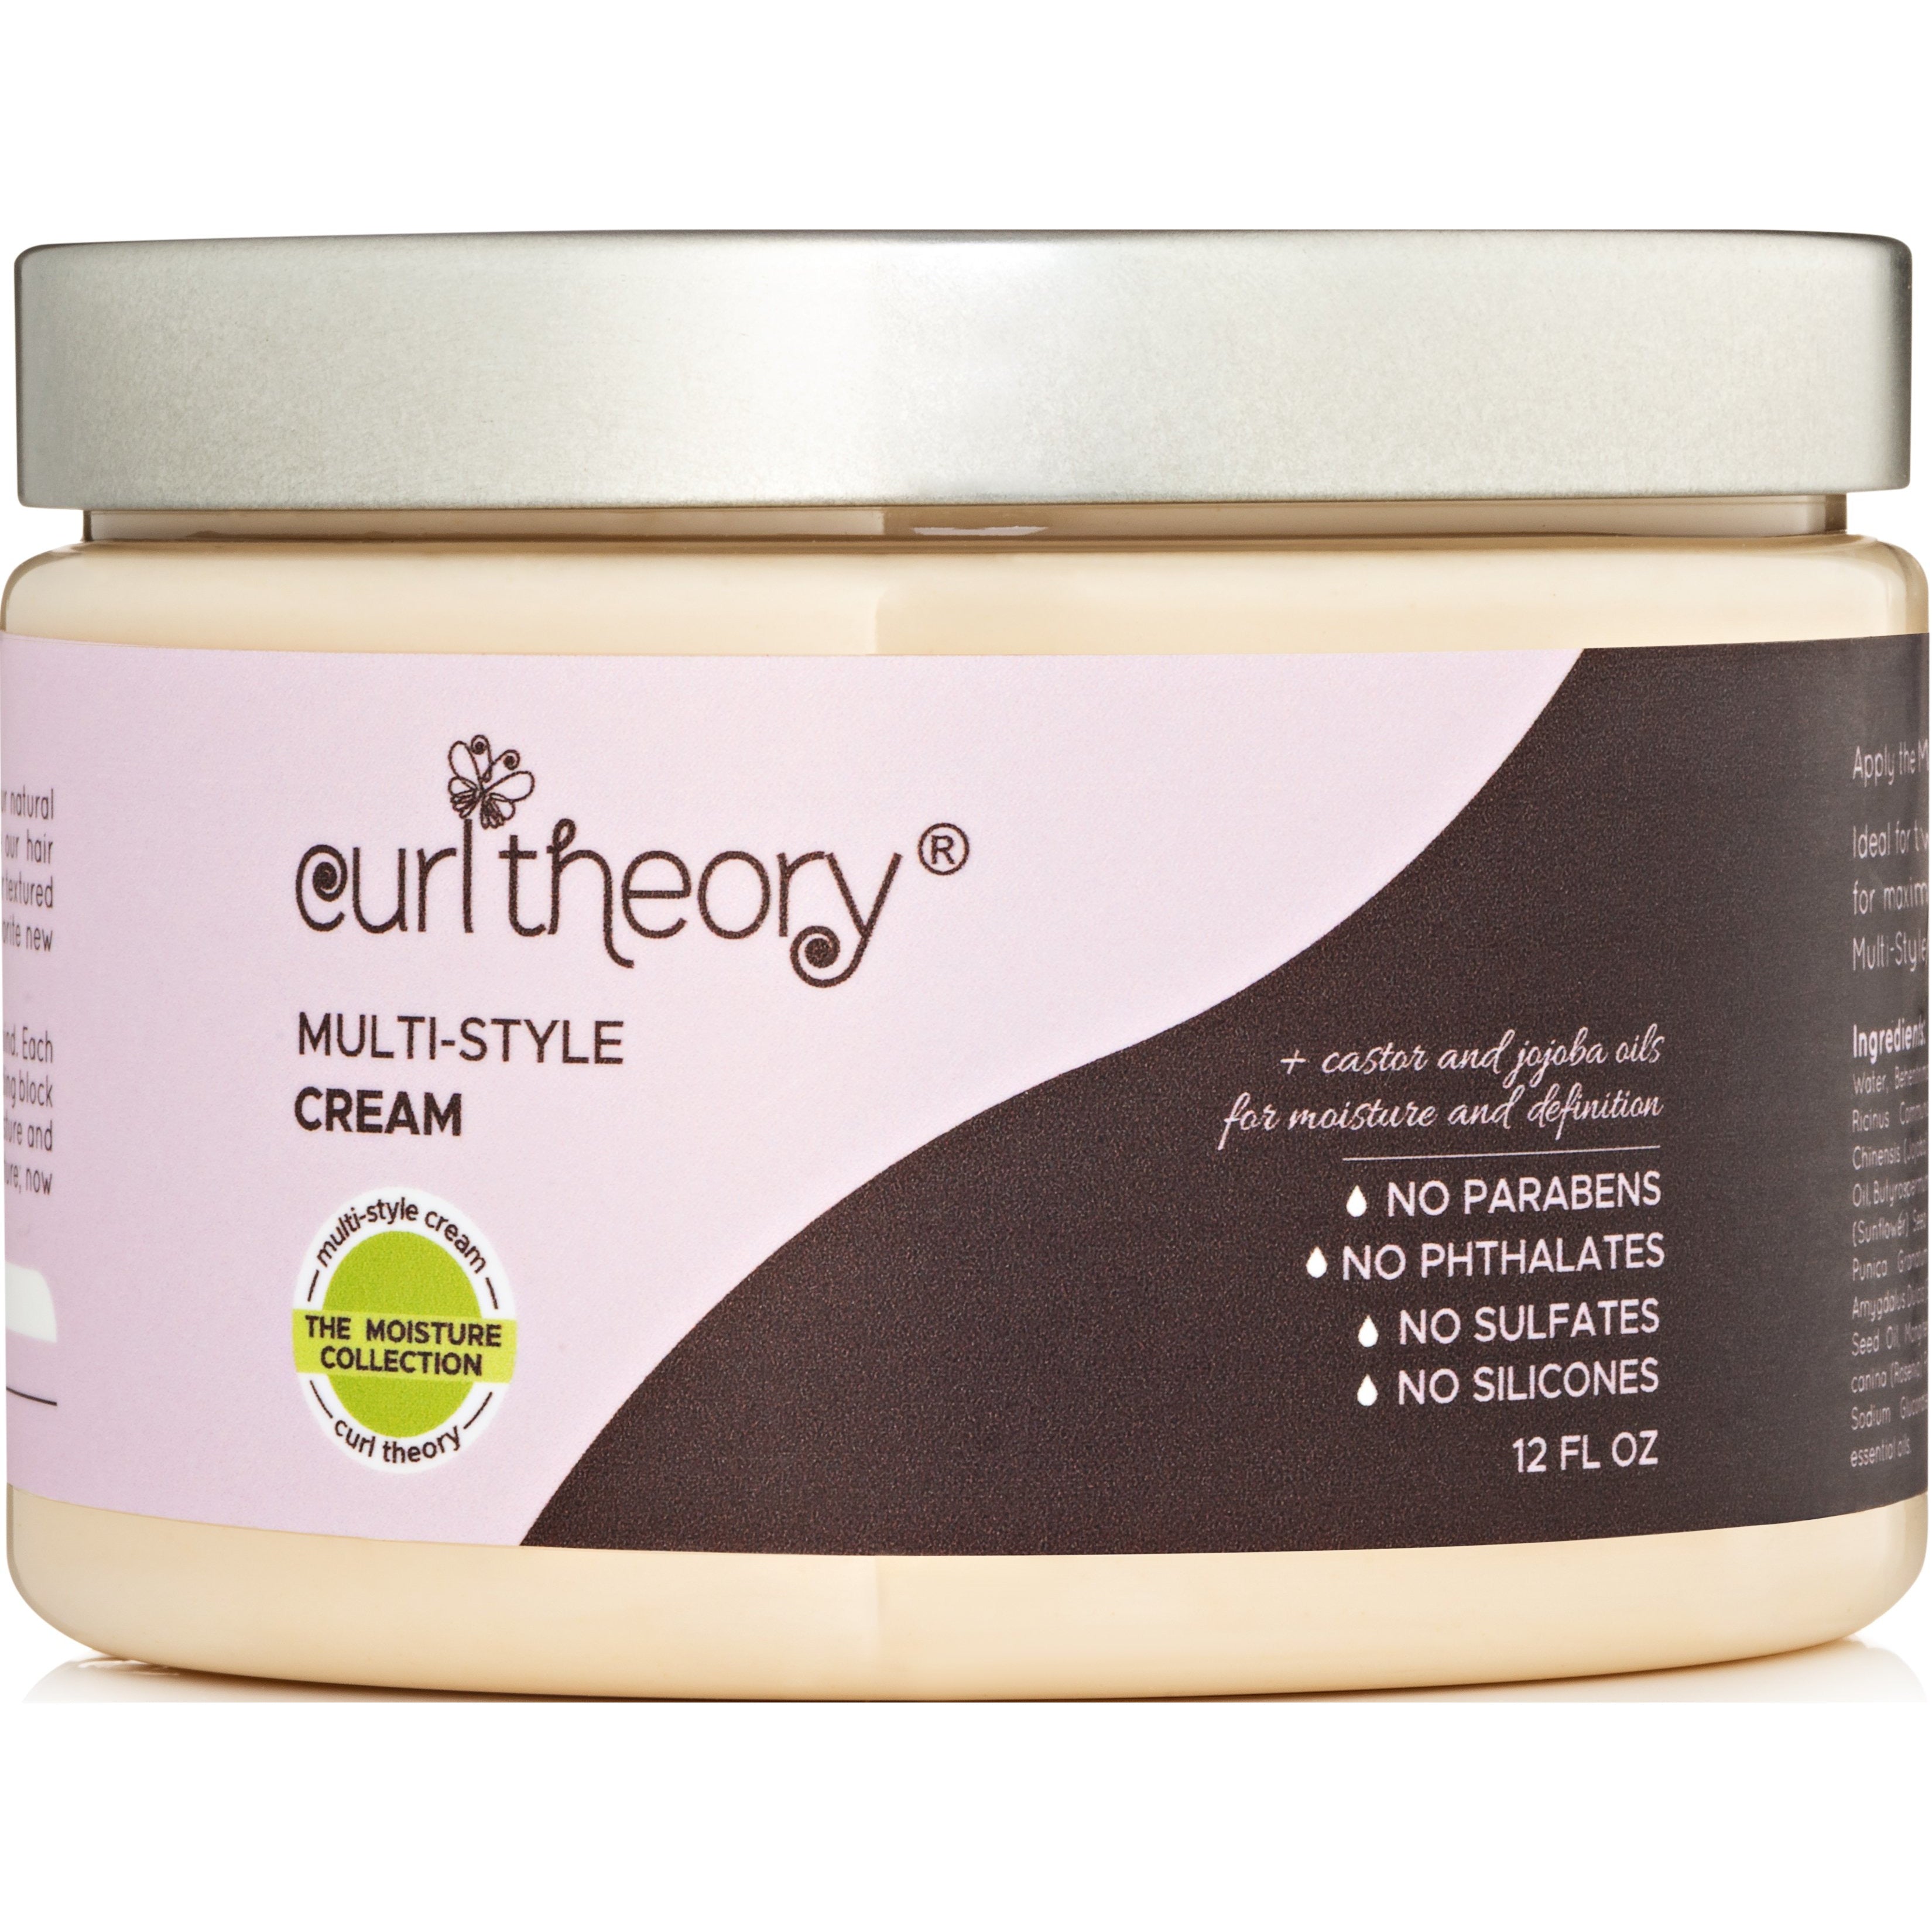 4th Ave Market: Curl Theory Multi-Style Hair Cream